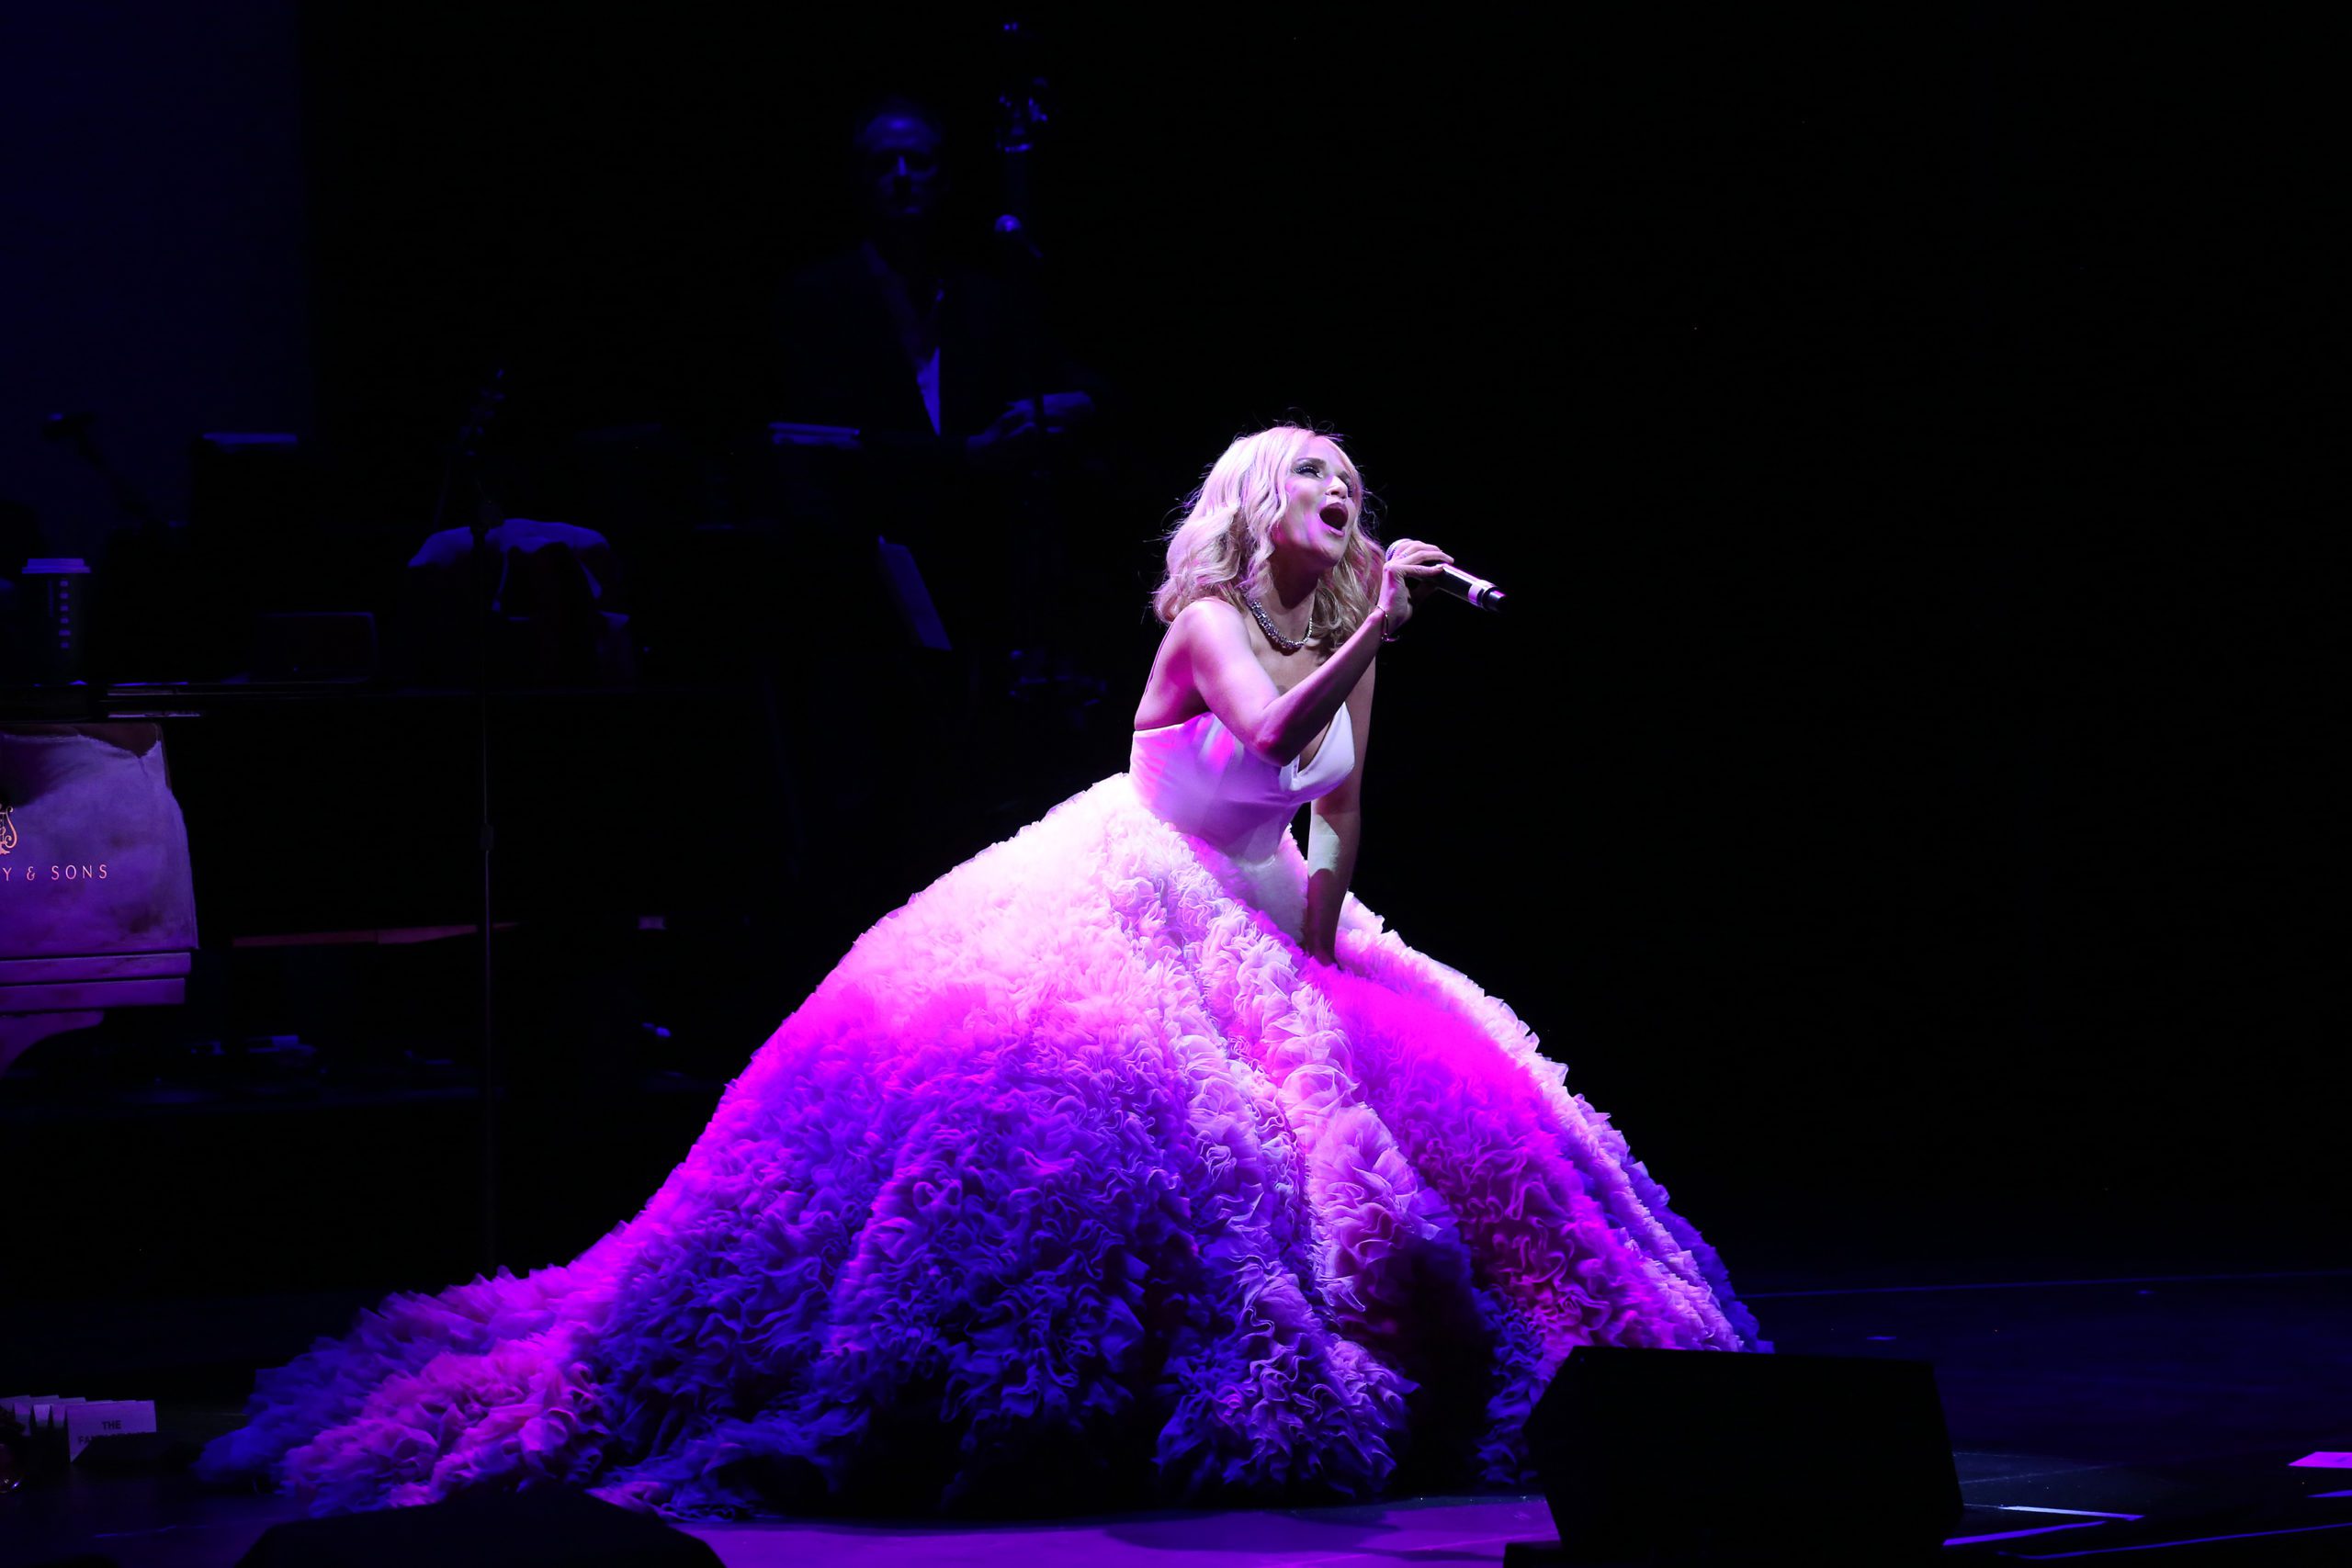 Kristin Chenoweth performing during the Opening Night of Kristin Chenoweth—My Love Letter To Broadway at the Lunt-Fontanne Theatre on November 2, 2016 in New York City.